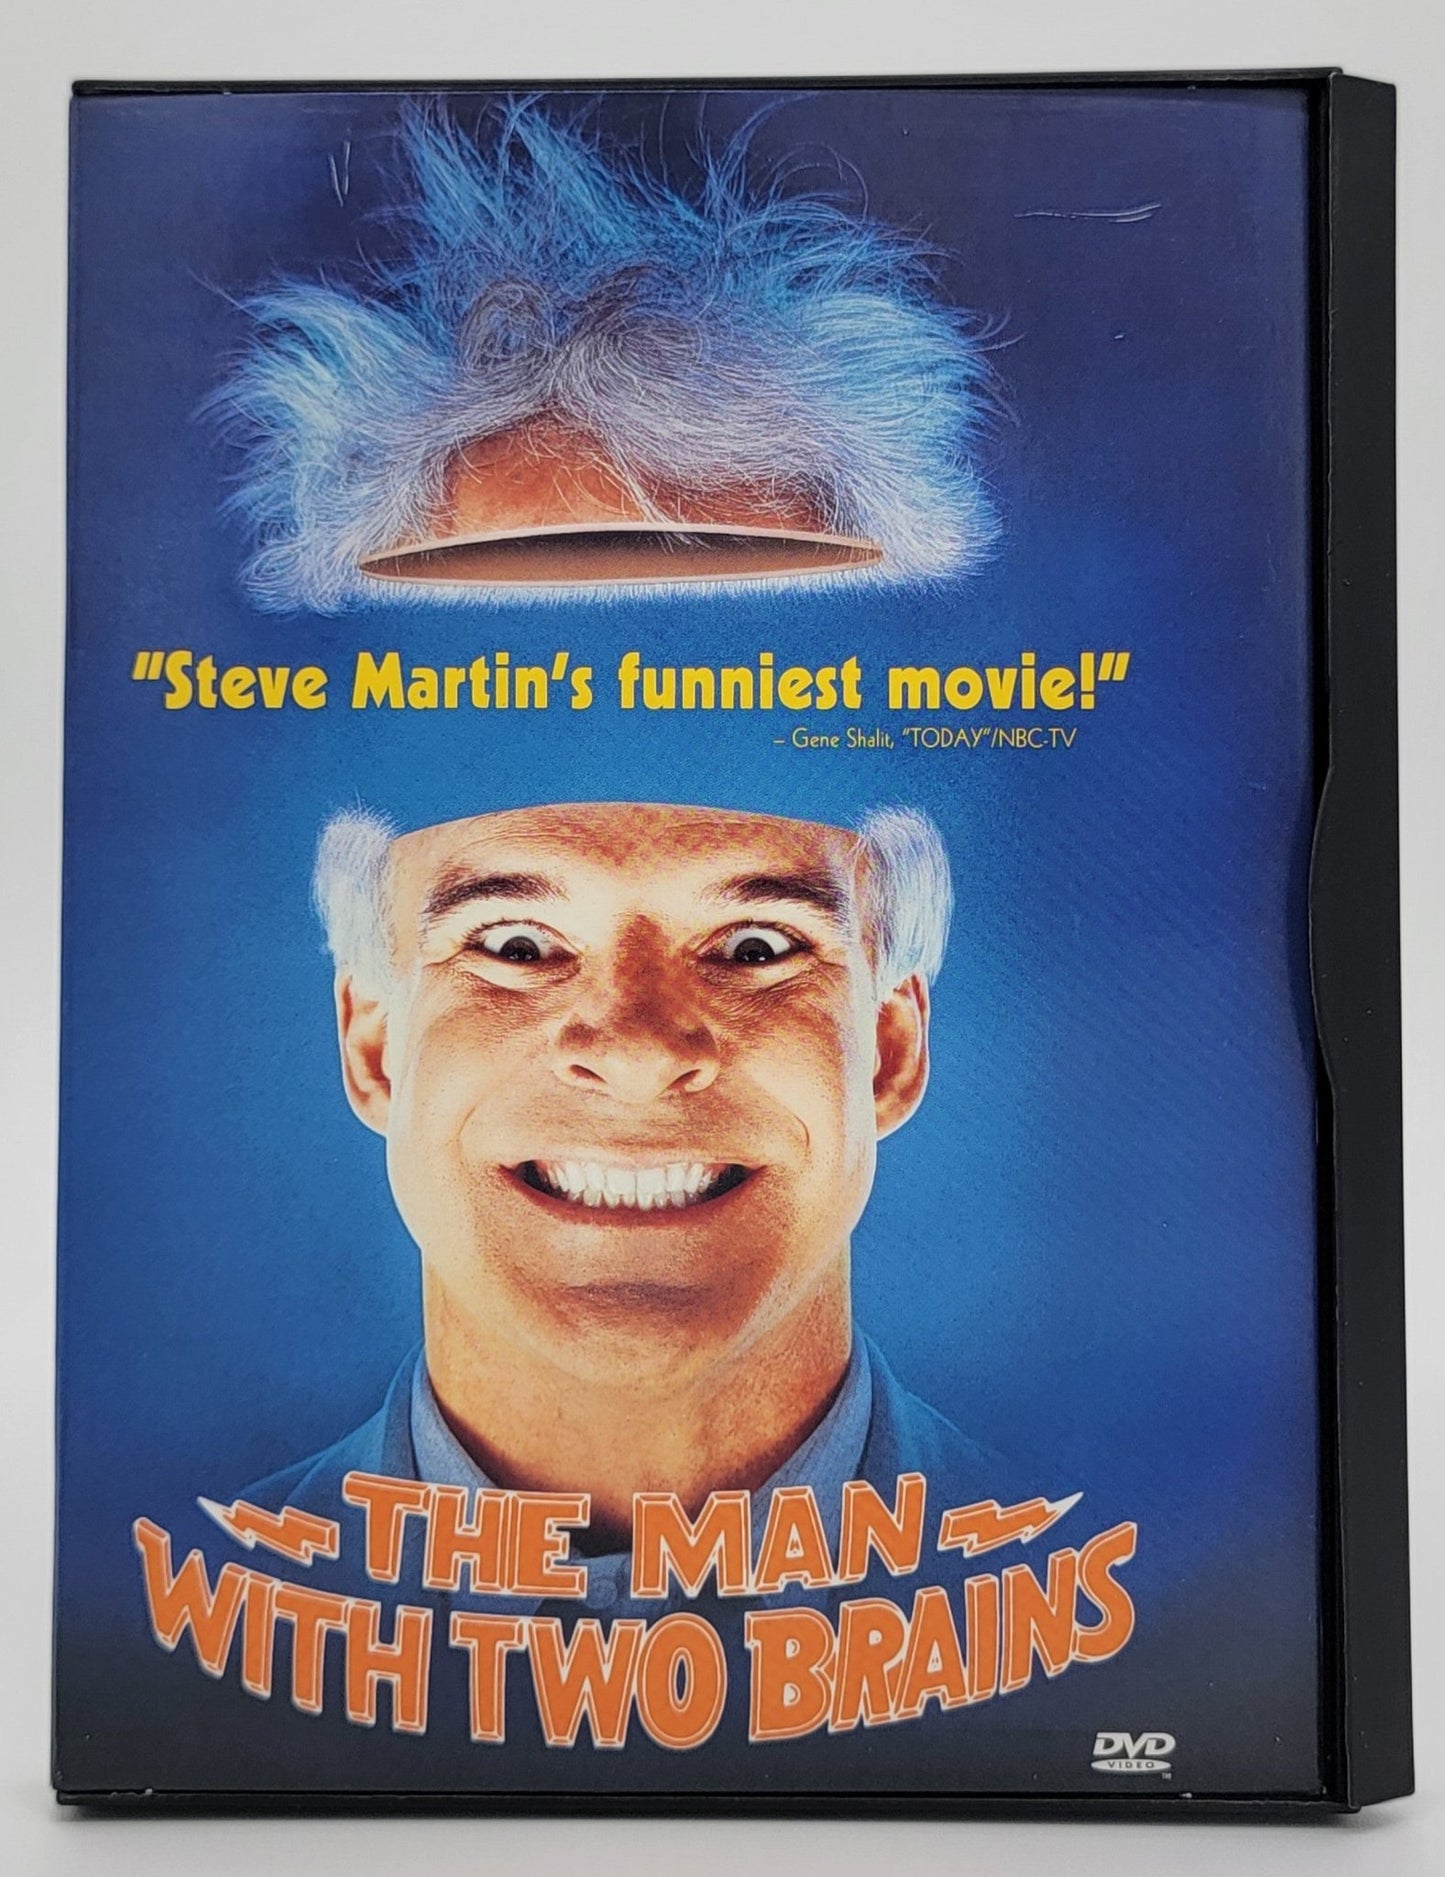 Warner Brothers - The Man with Two Brains | DVD | Standard Version - DVD - Steady Bunny Shop